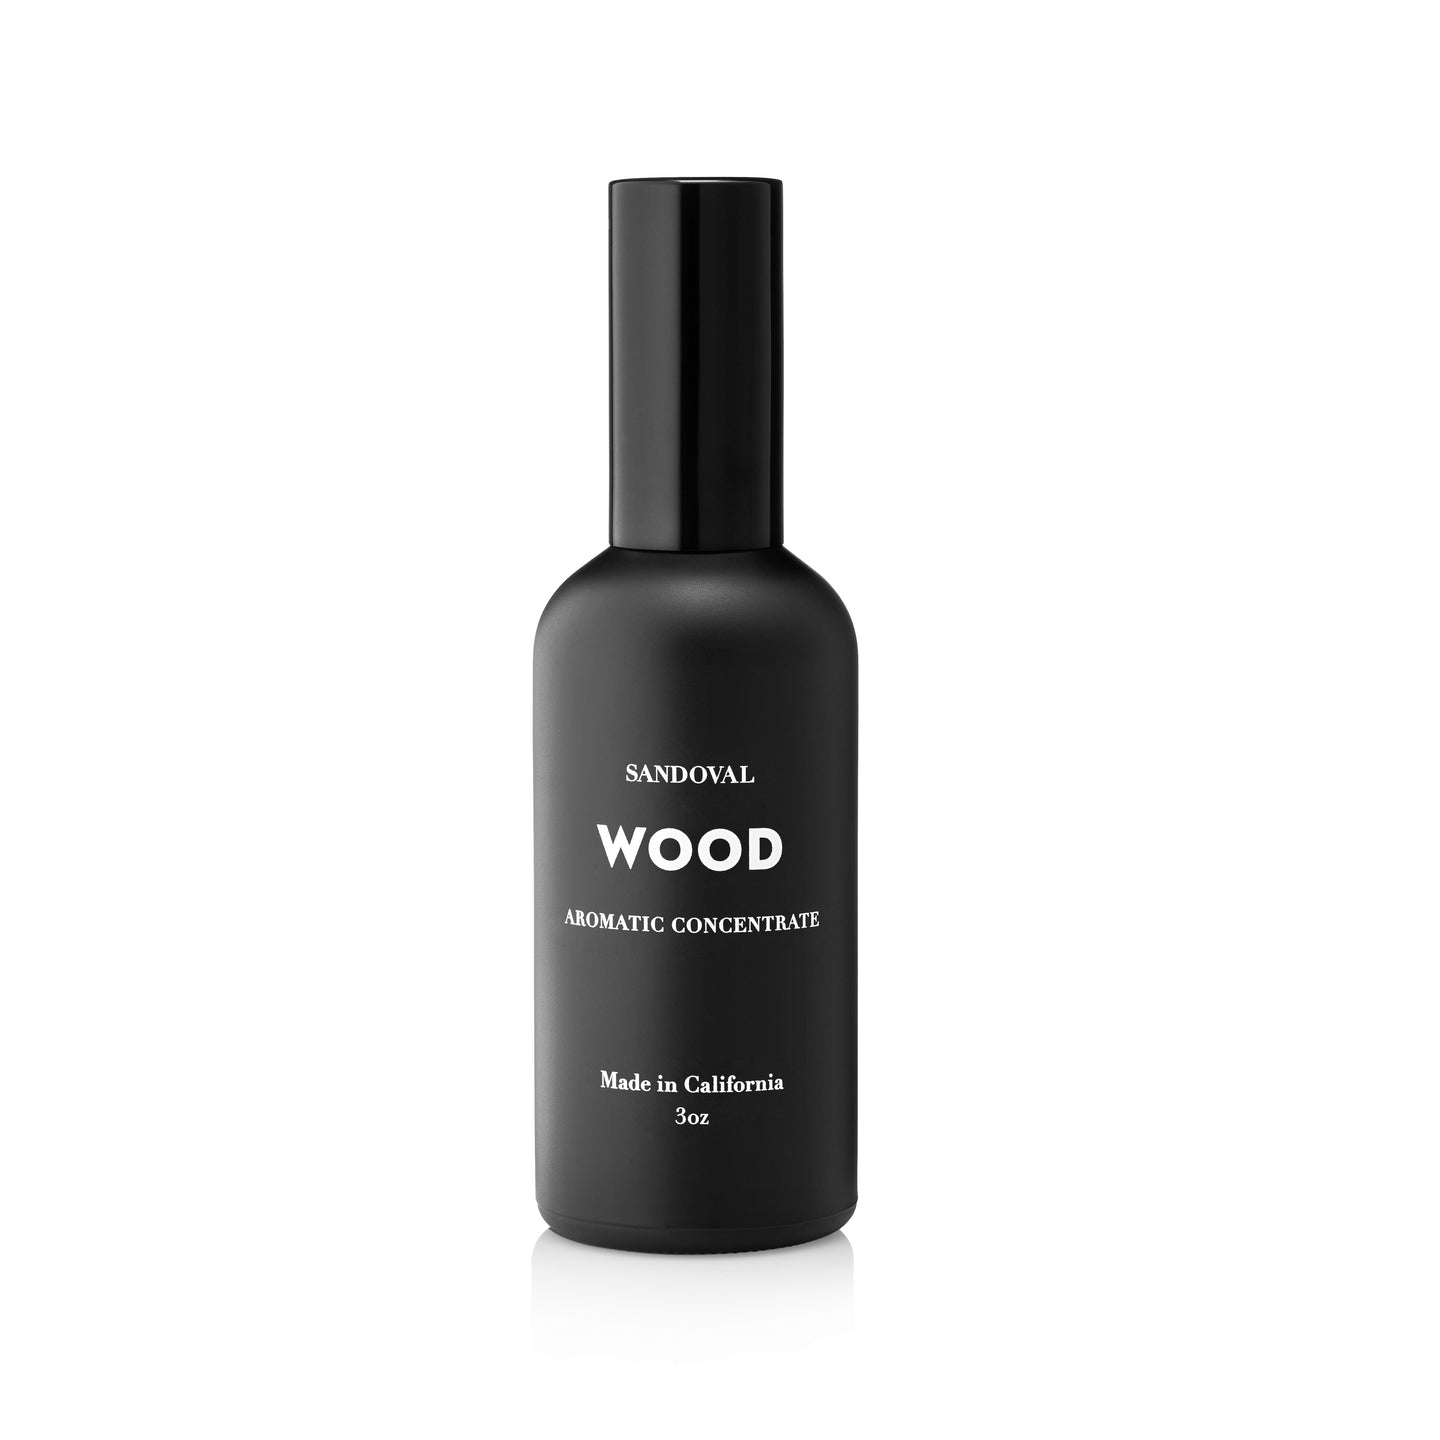 WOOD AROMATIC CONCENTRATE